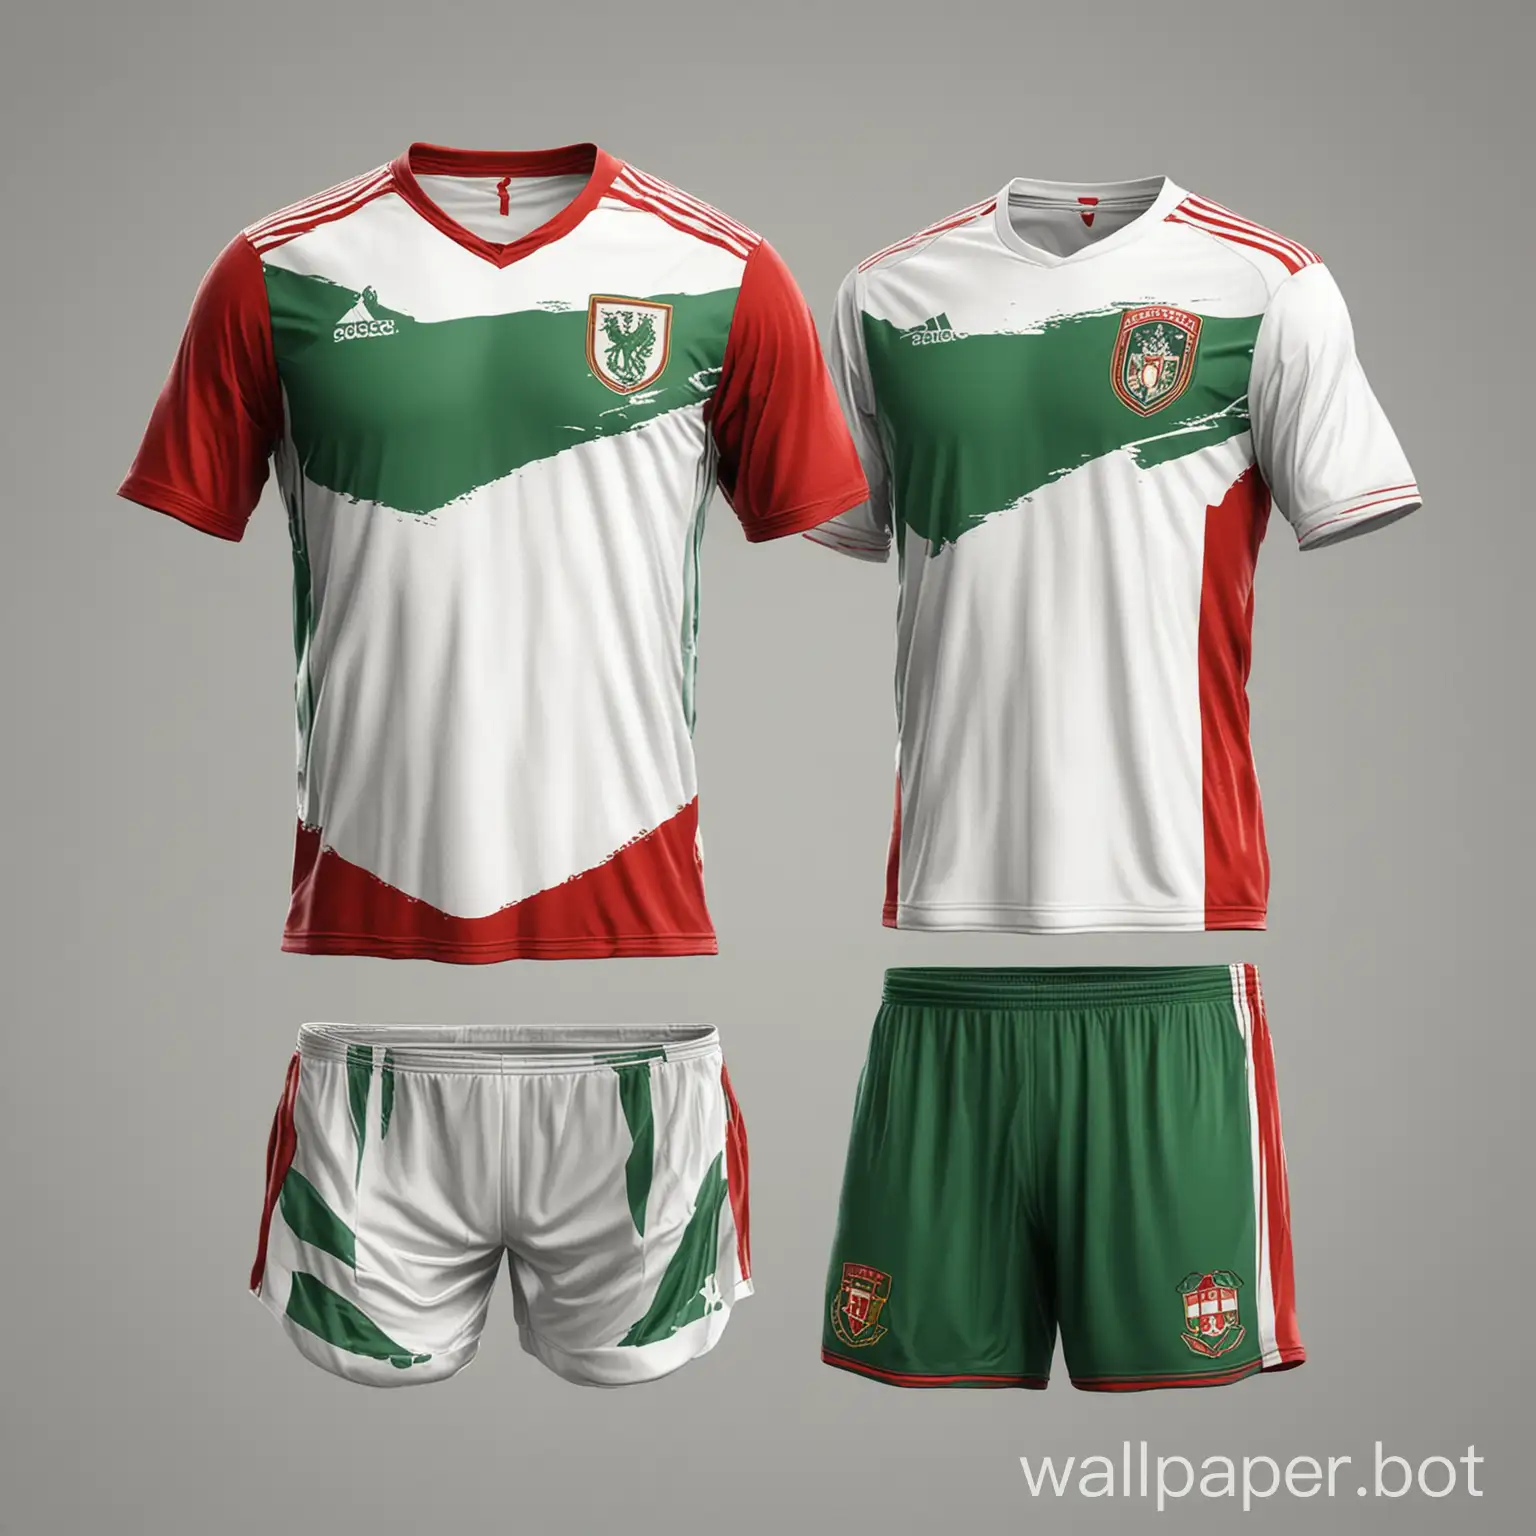 soccer uniform red-green with white in wide stripe white background sketch concept of uniform